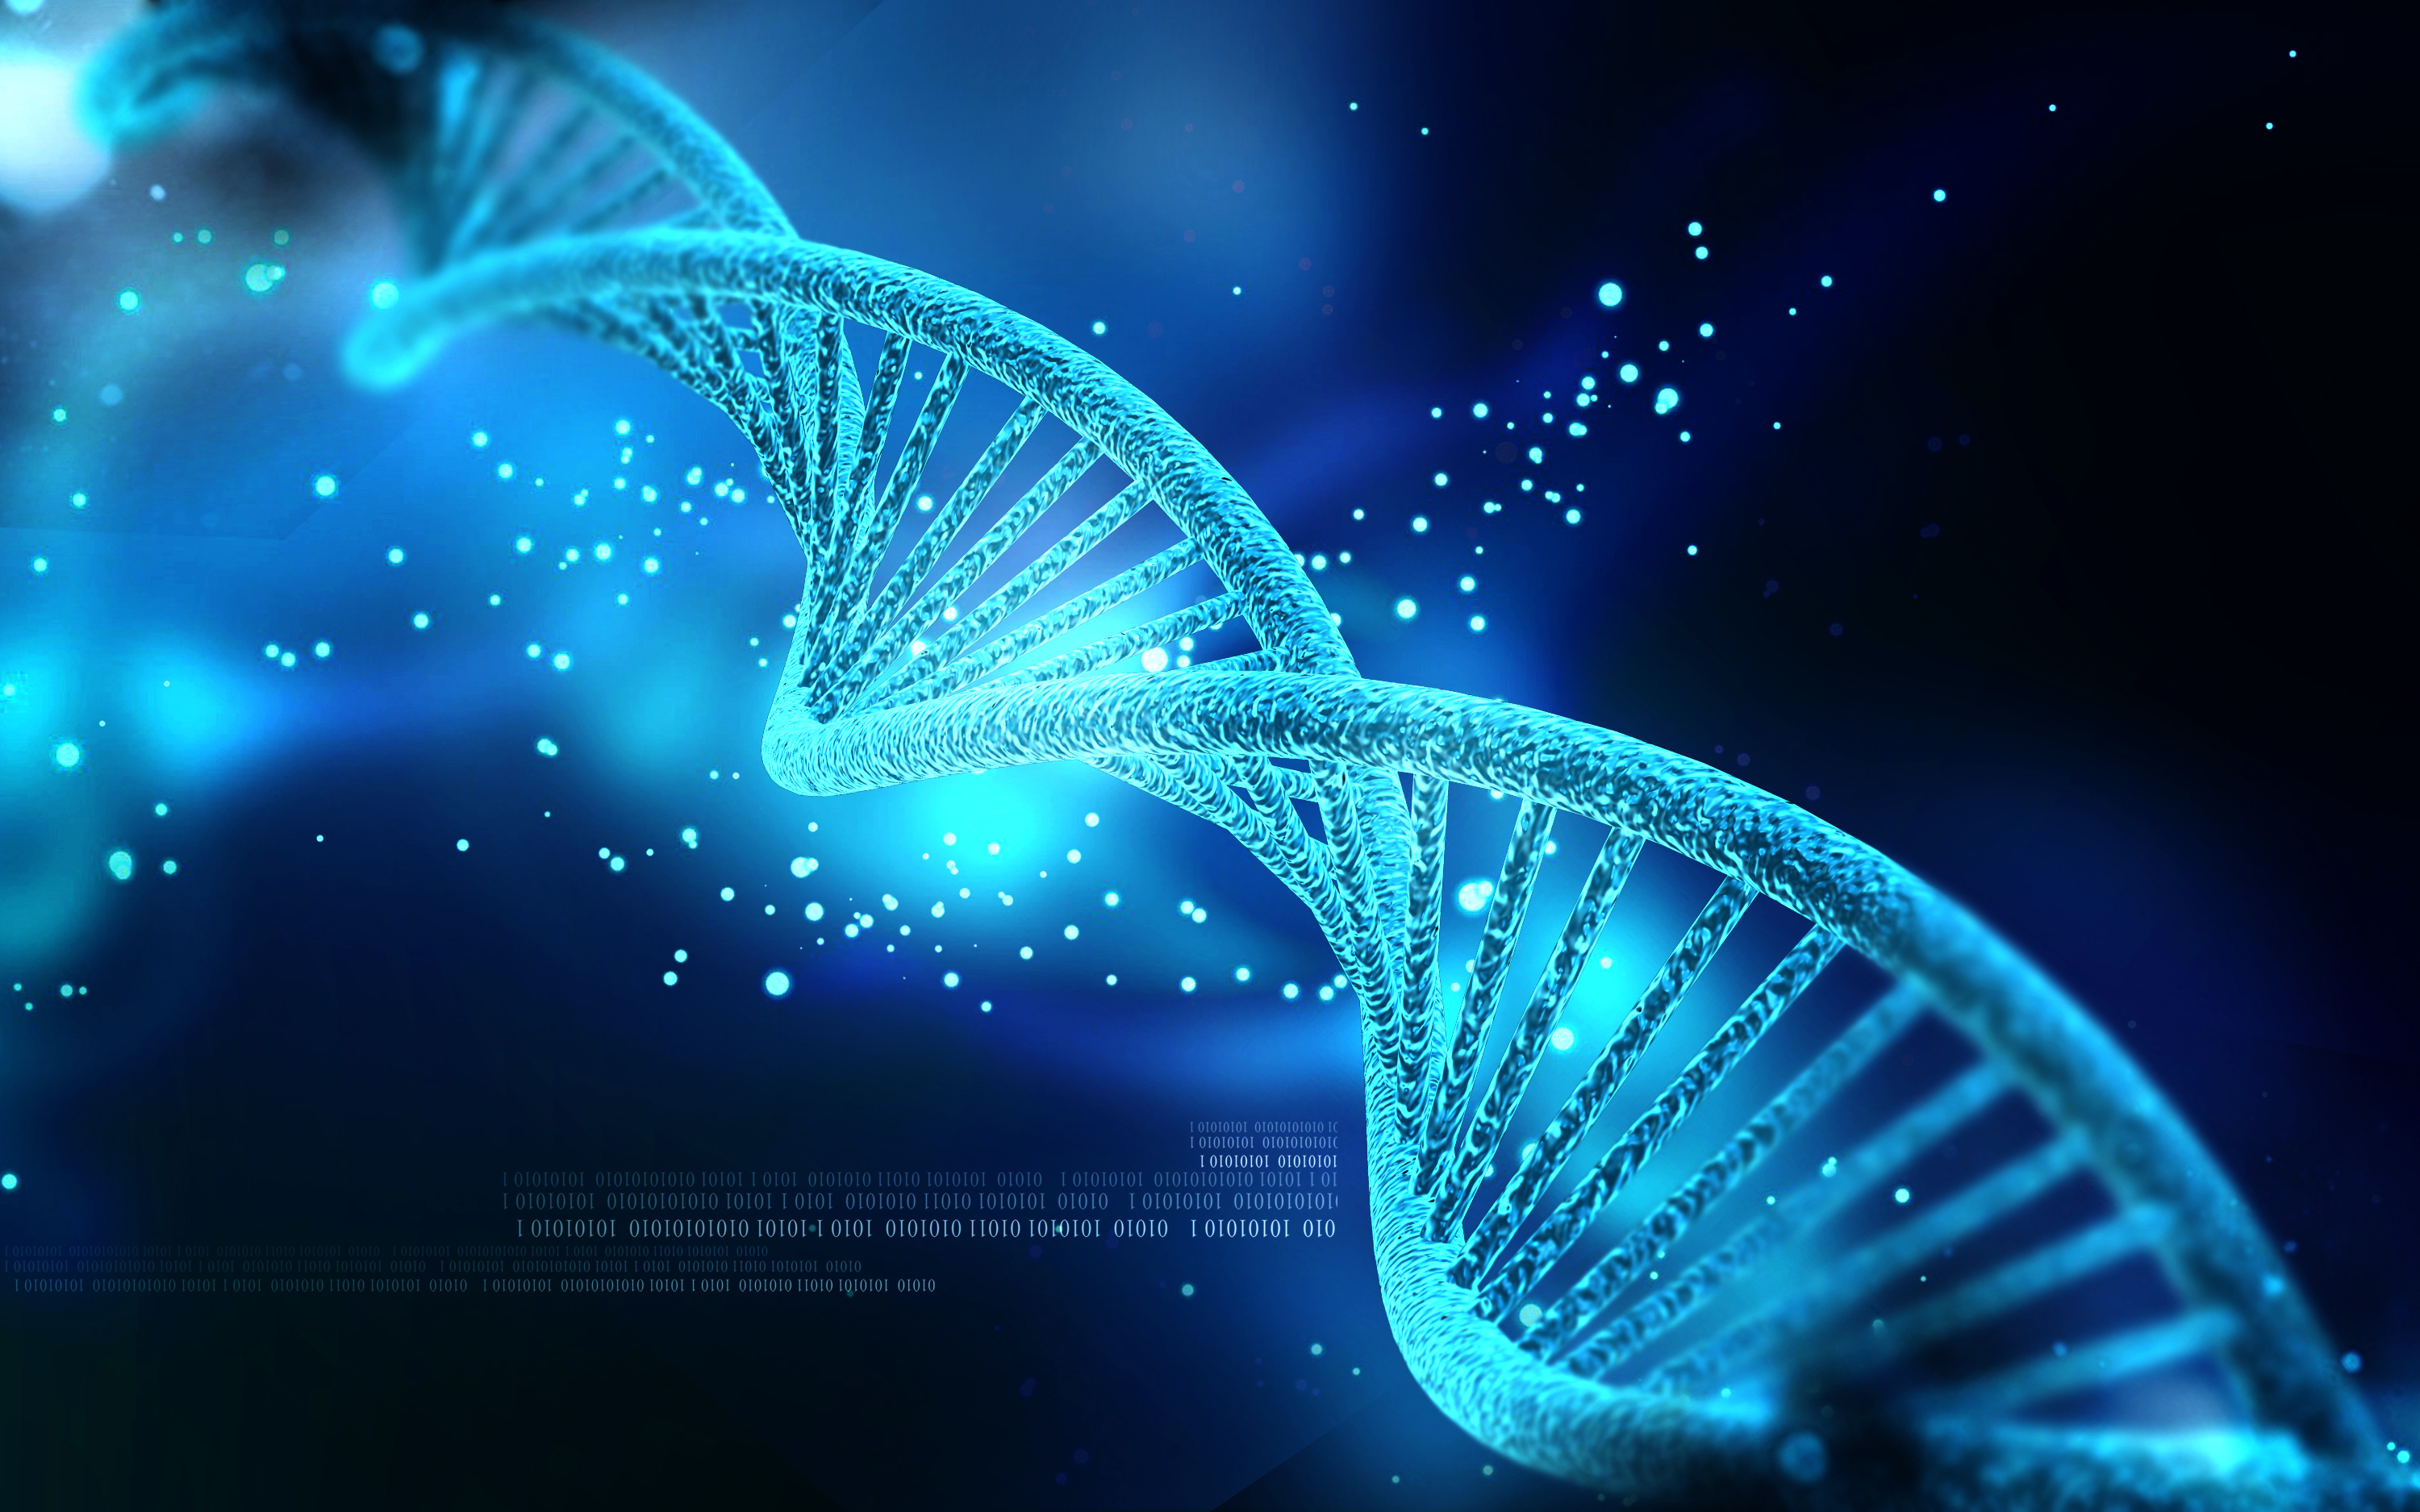 CHOP Researchers Discover Genetic Variants Linked to Very Early Onset IBD in Children